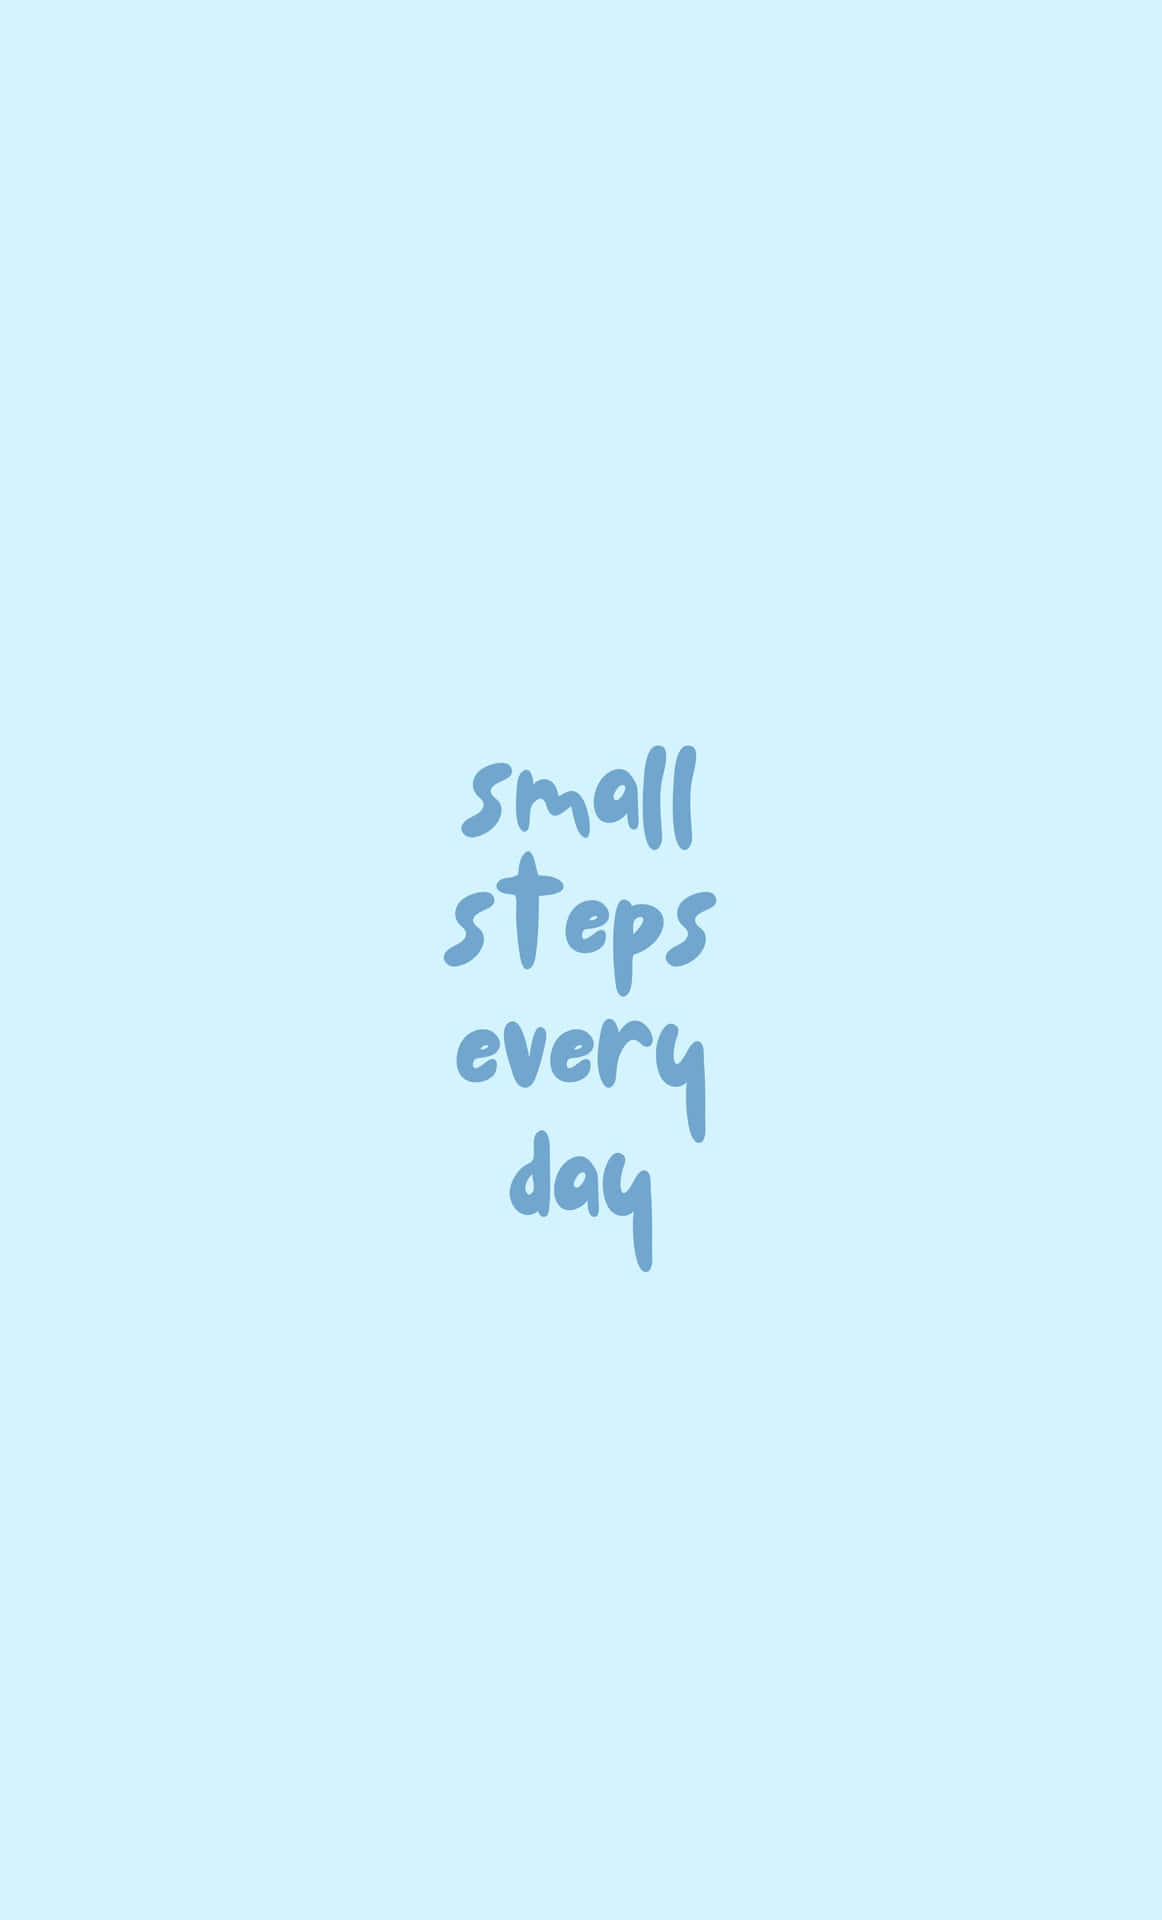 Small Steps Every Day Inspirational Quote Wallpaper